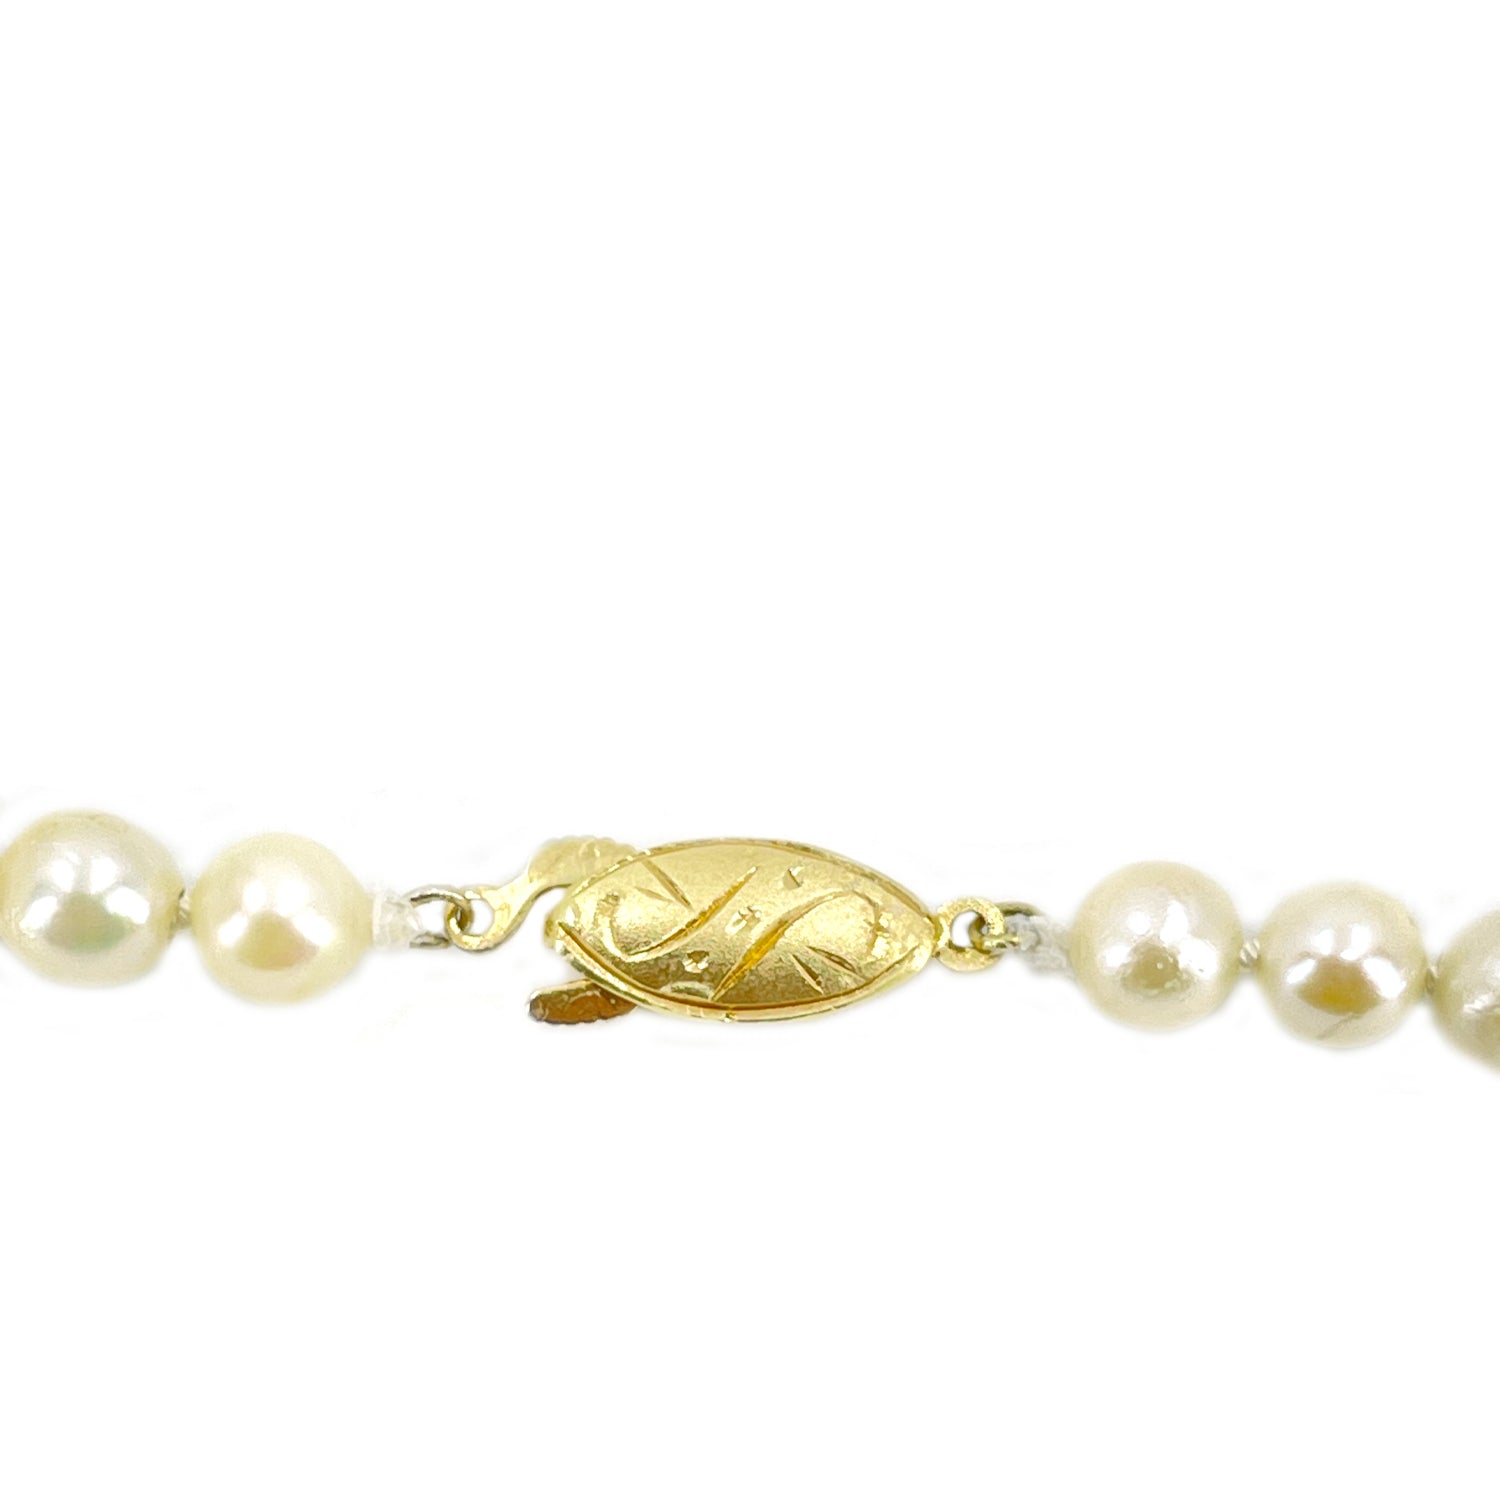 Deco Choker Japanese Saltwater Cultured Akoya Pearl Baroque Necklace - Sterling Silver 15.50 Inch